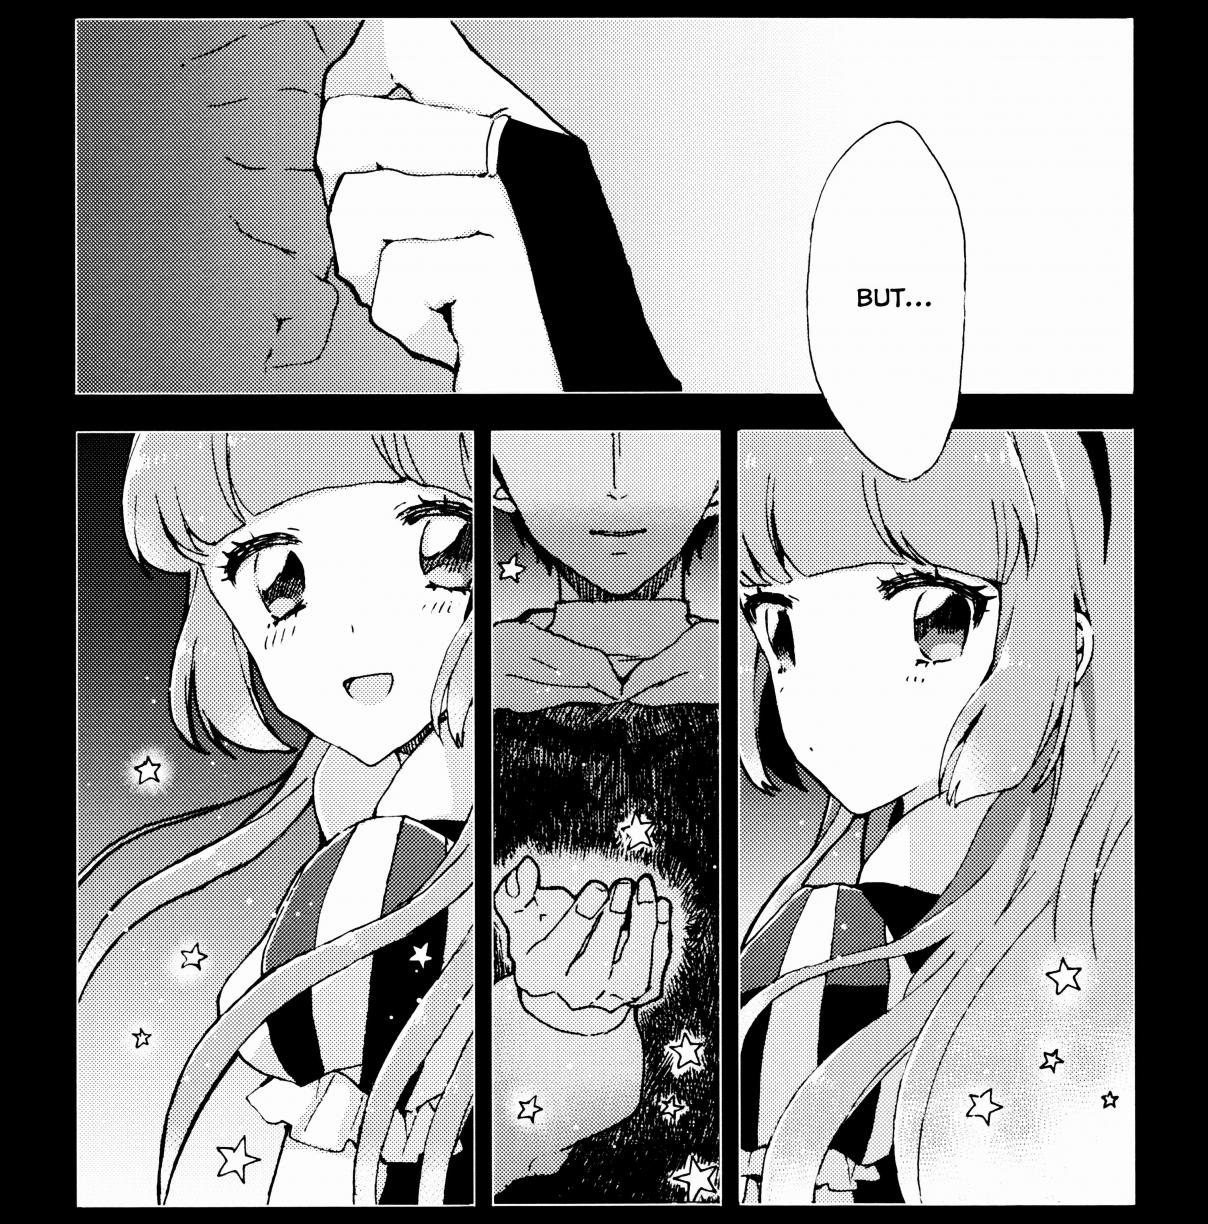 Aikatsu! Does Snow White's Dream End Happily Ever After? (Doujinshi) Oneshot